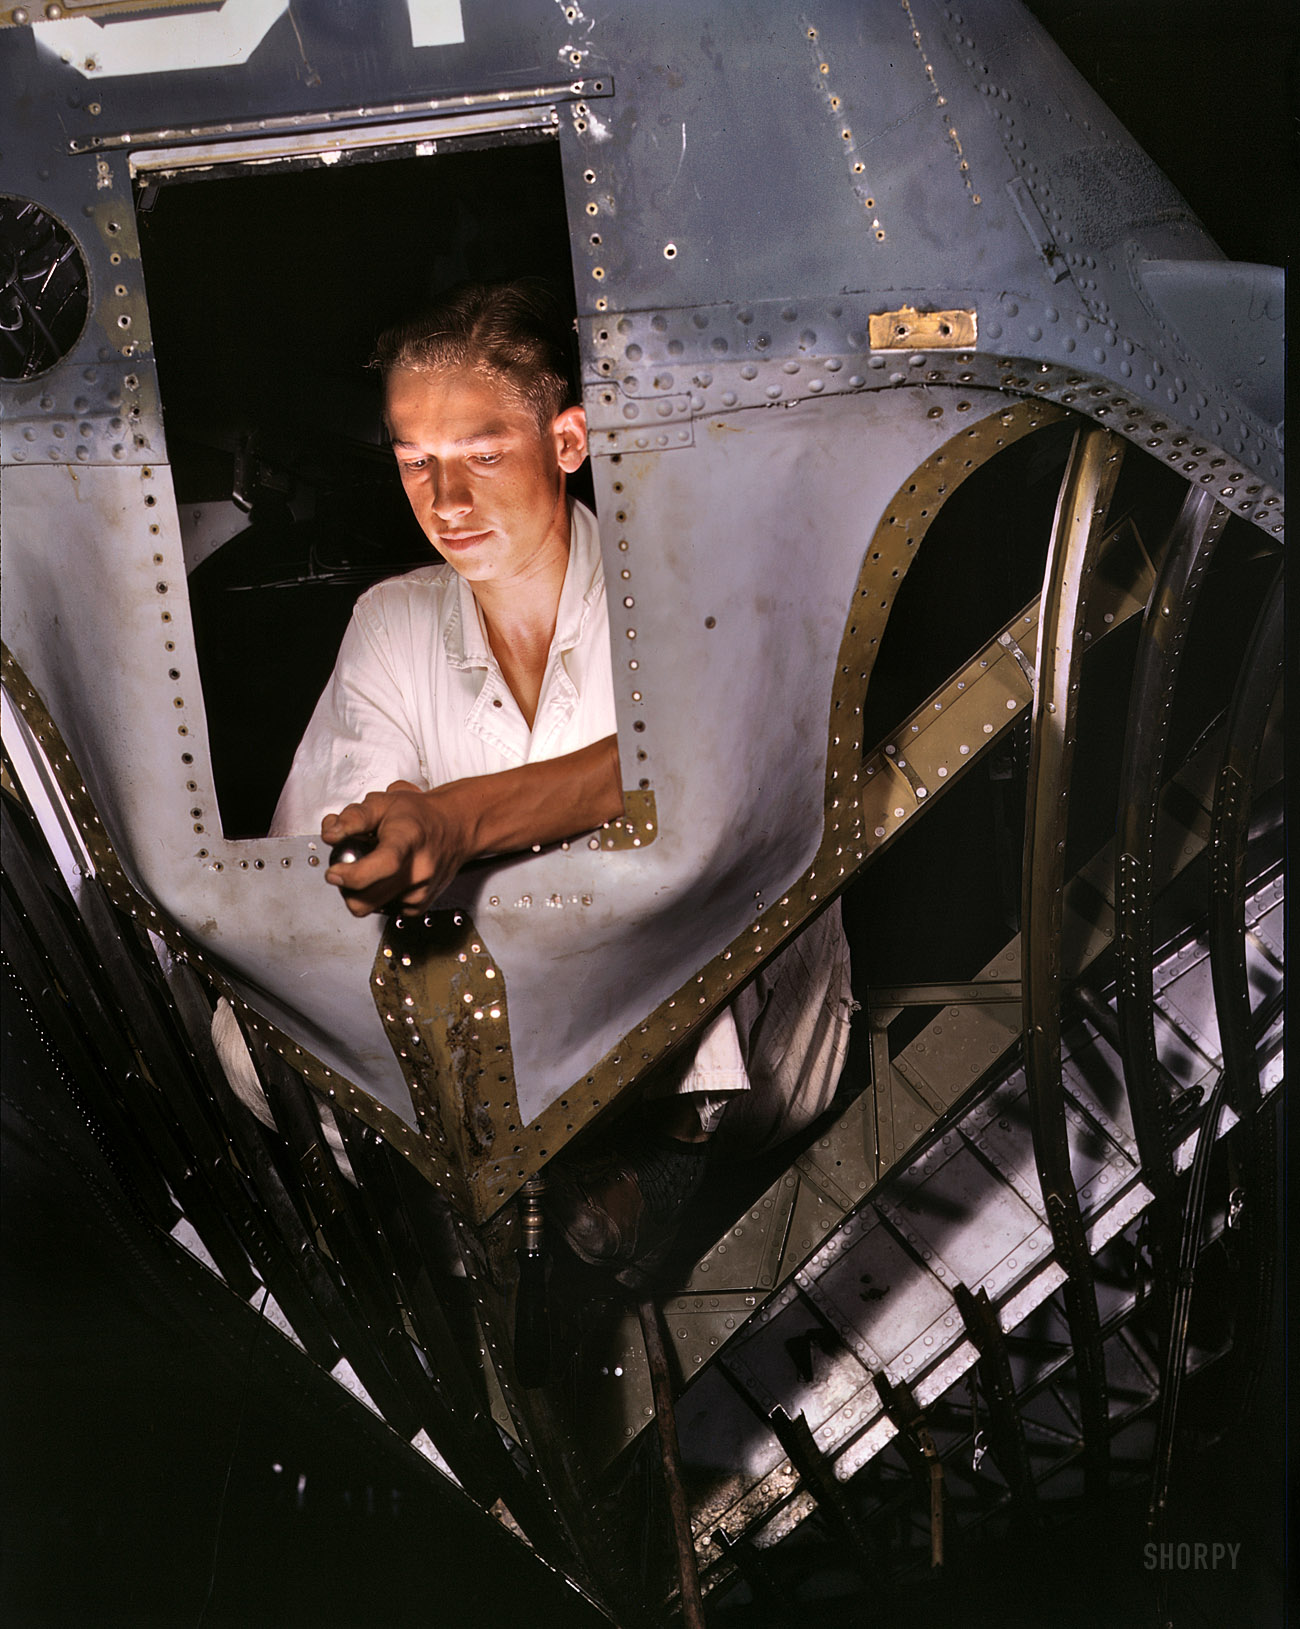 August 1942. "As an NYA trainee working inside the nose of a PBY, Elmer J. Pace is learning the construction of Navy planes at Corpus Christi Naval Air Base, Texas." 4x5 Kodachrome transparency by Howard Hollem. View full size.